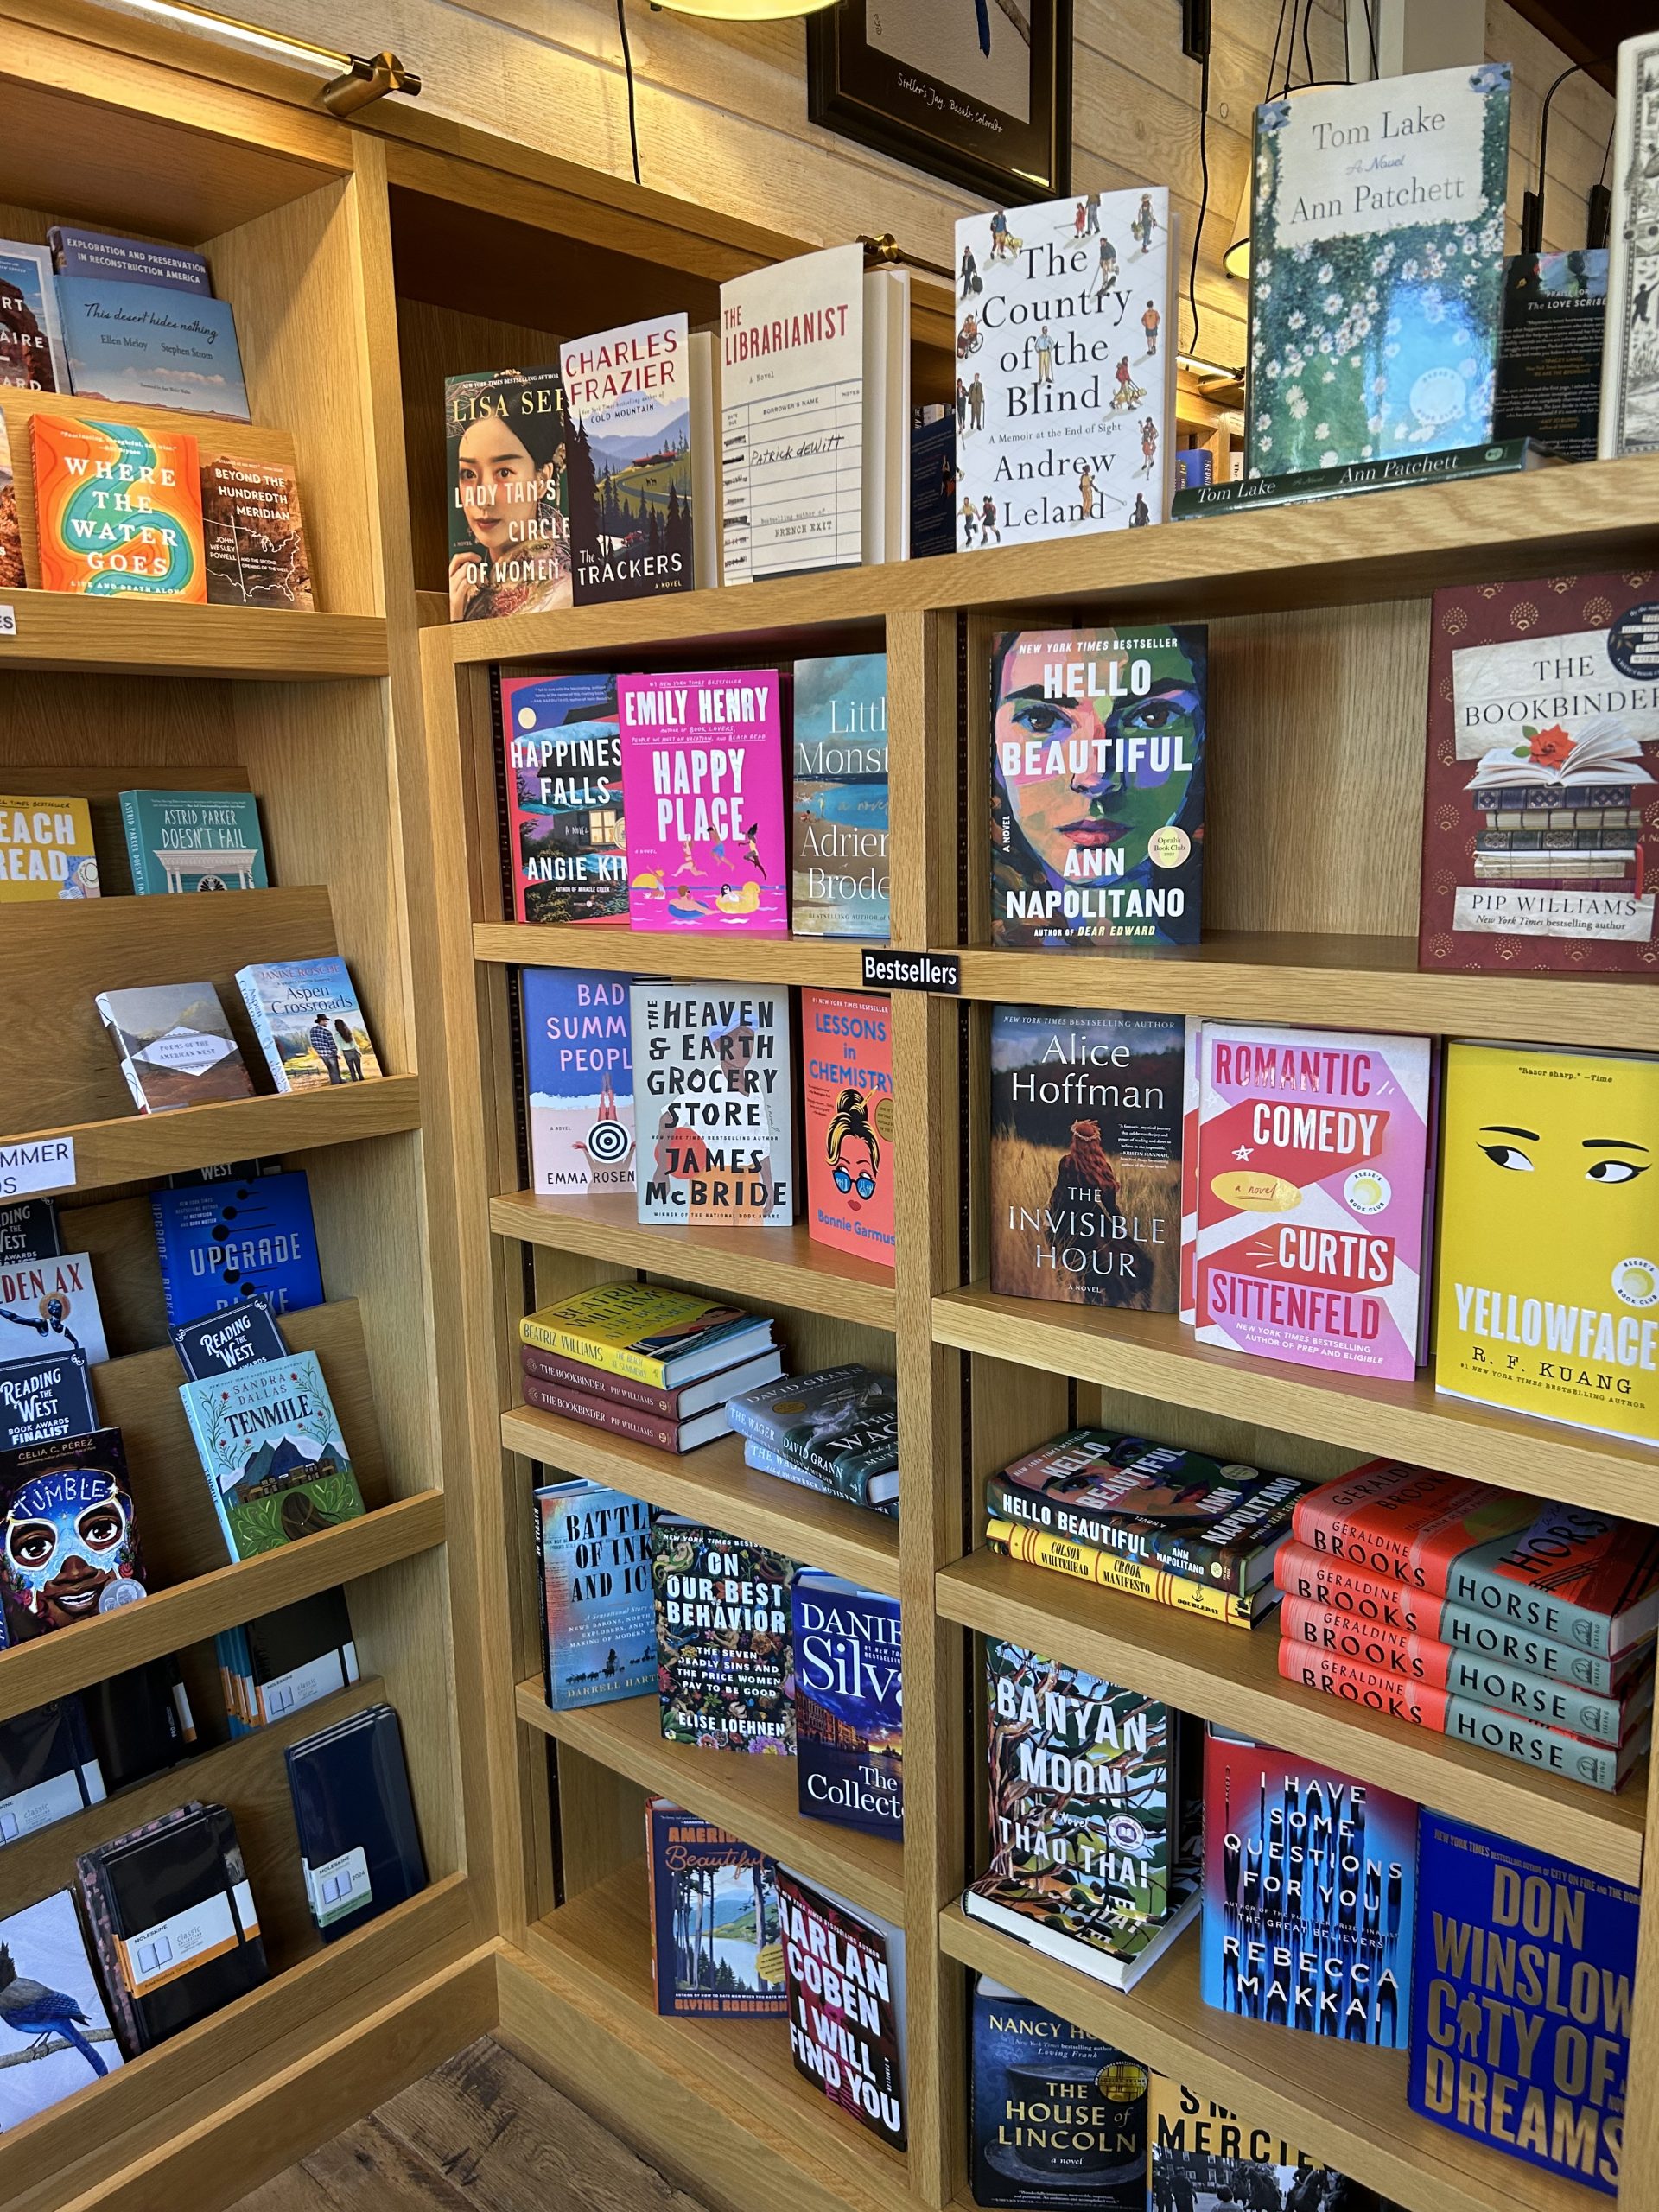 Your new favorites await you at a local bookstore.